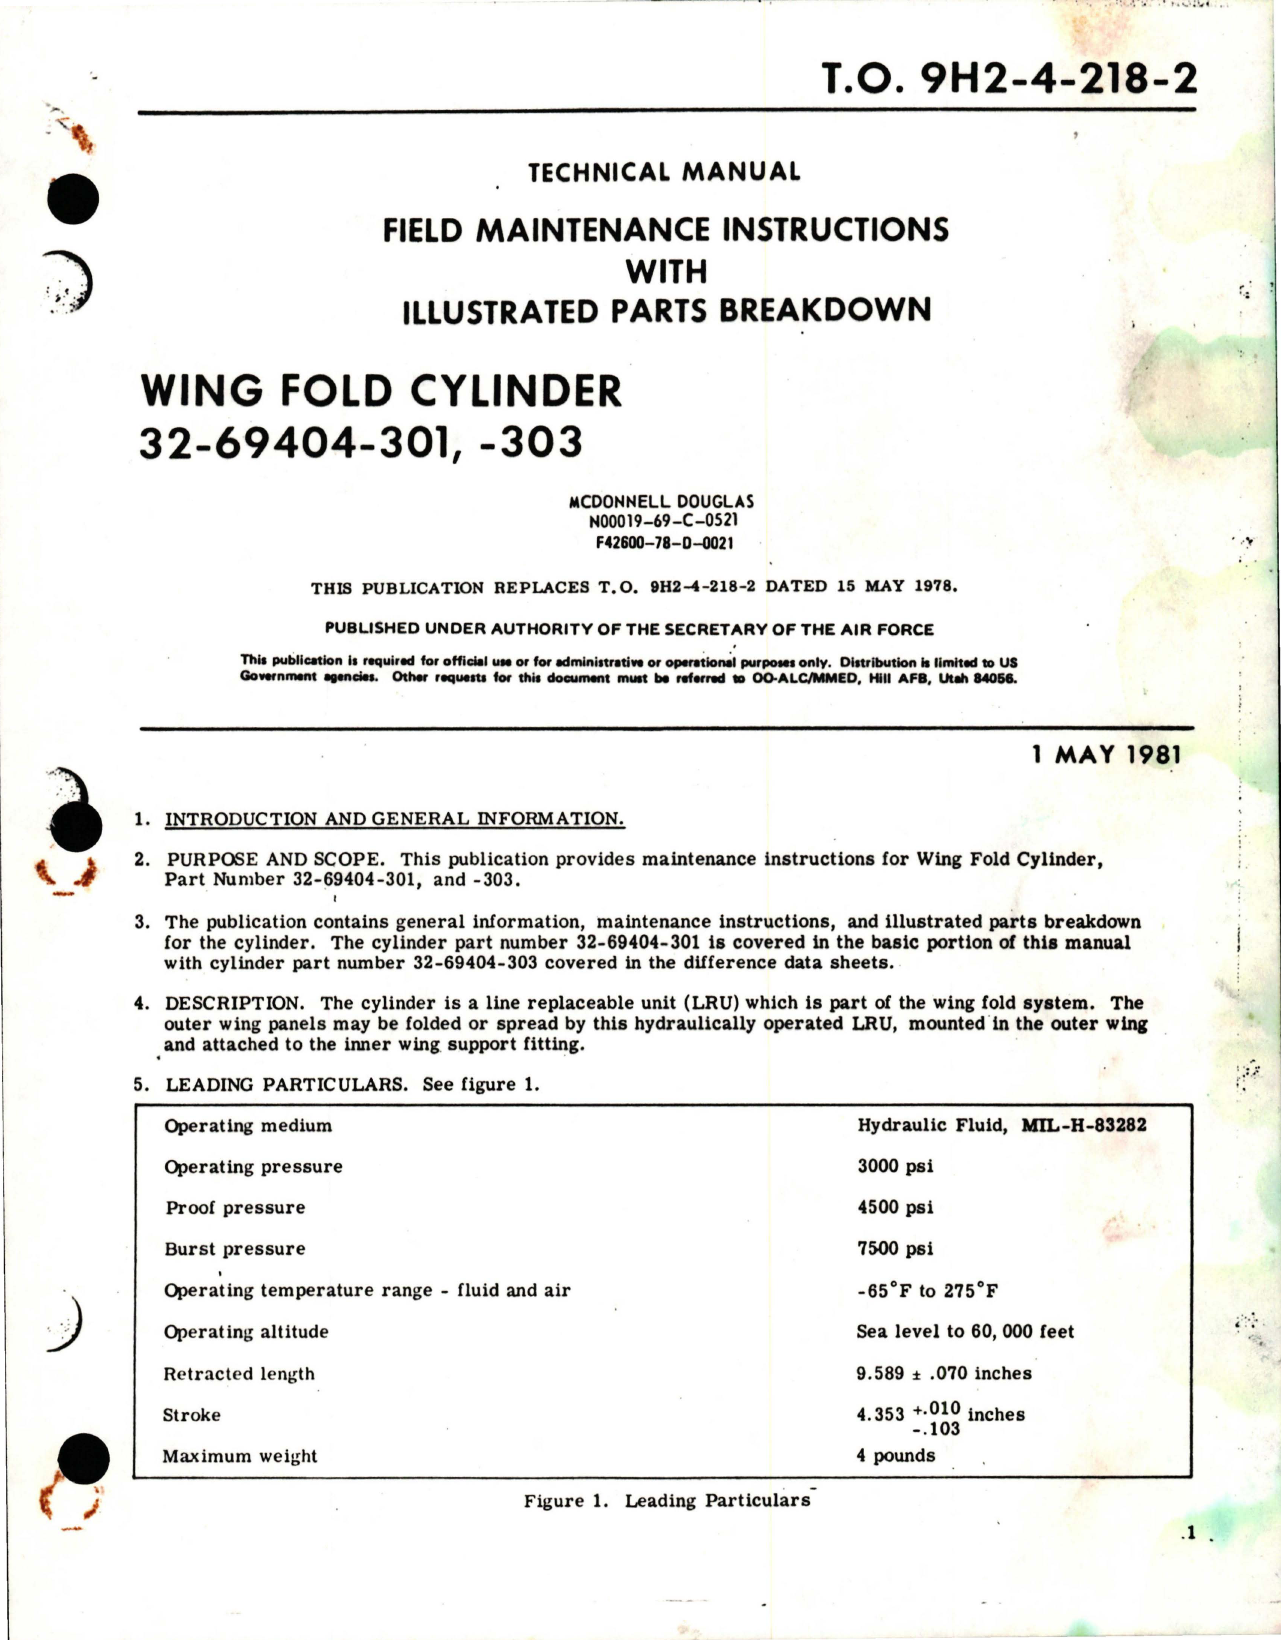 Sample page 1 from AirCorps Library document: Field Maintenance Instructions with Illustrated Parts for Wing Fold Cylinder - 32-69404-301 and 32-69404-303